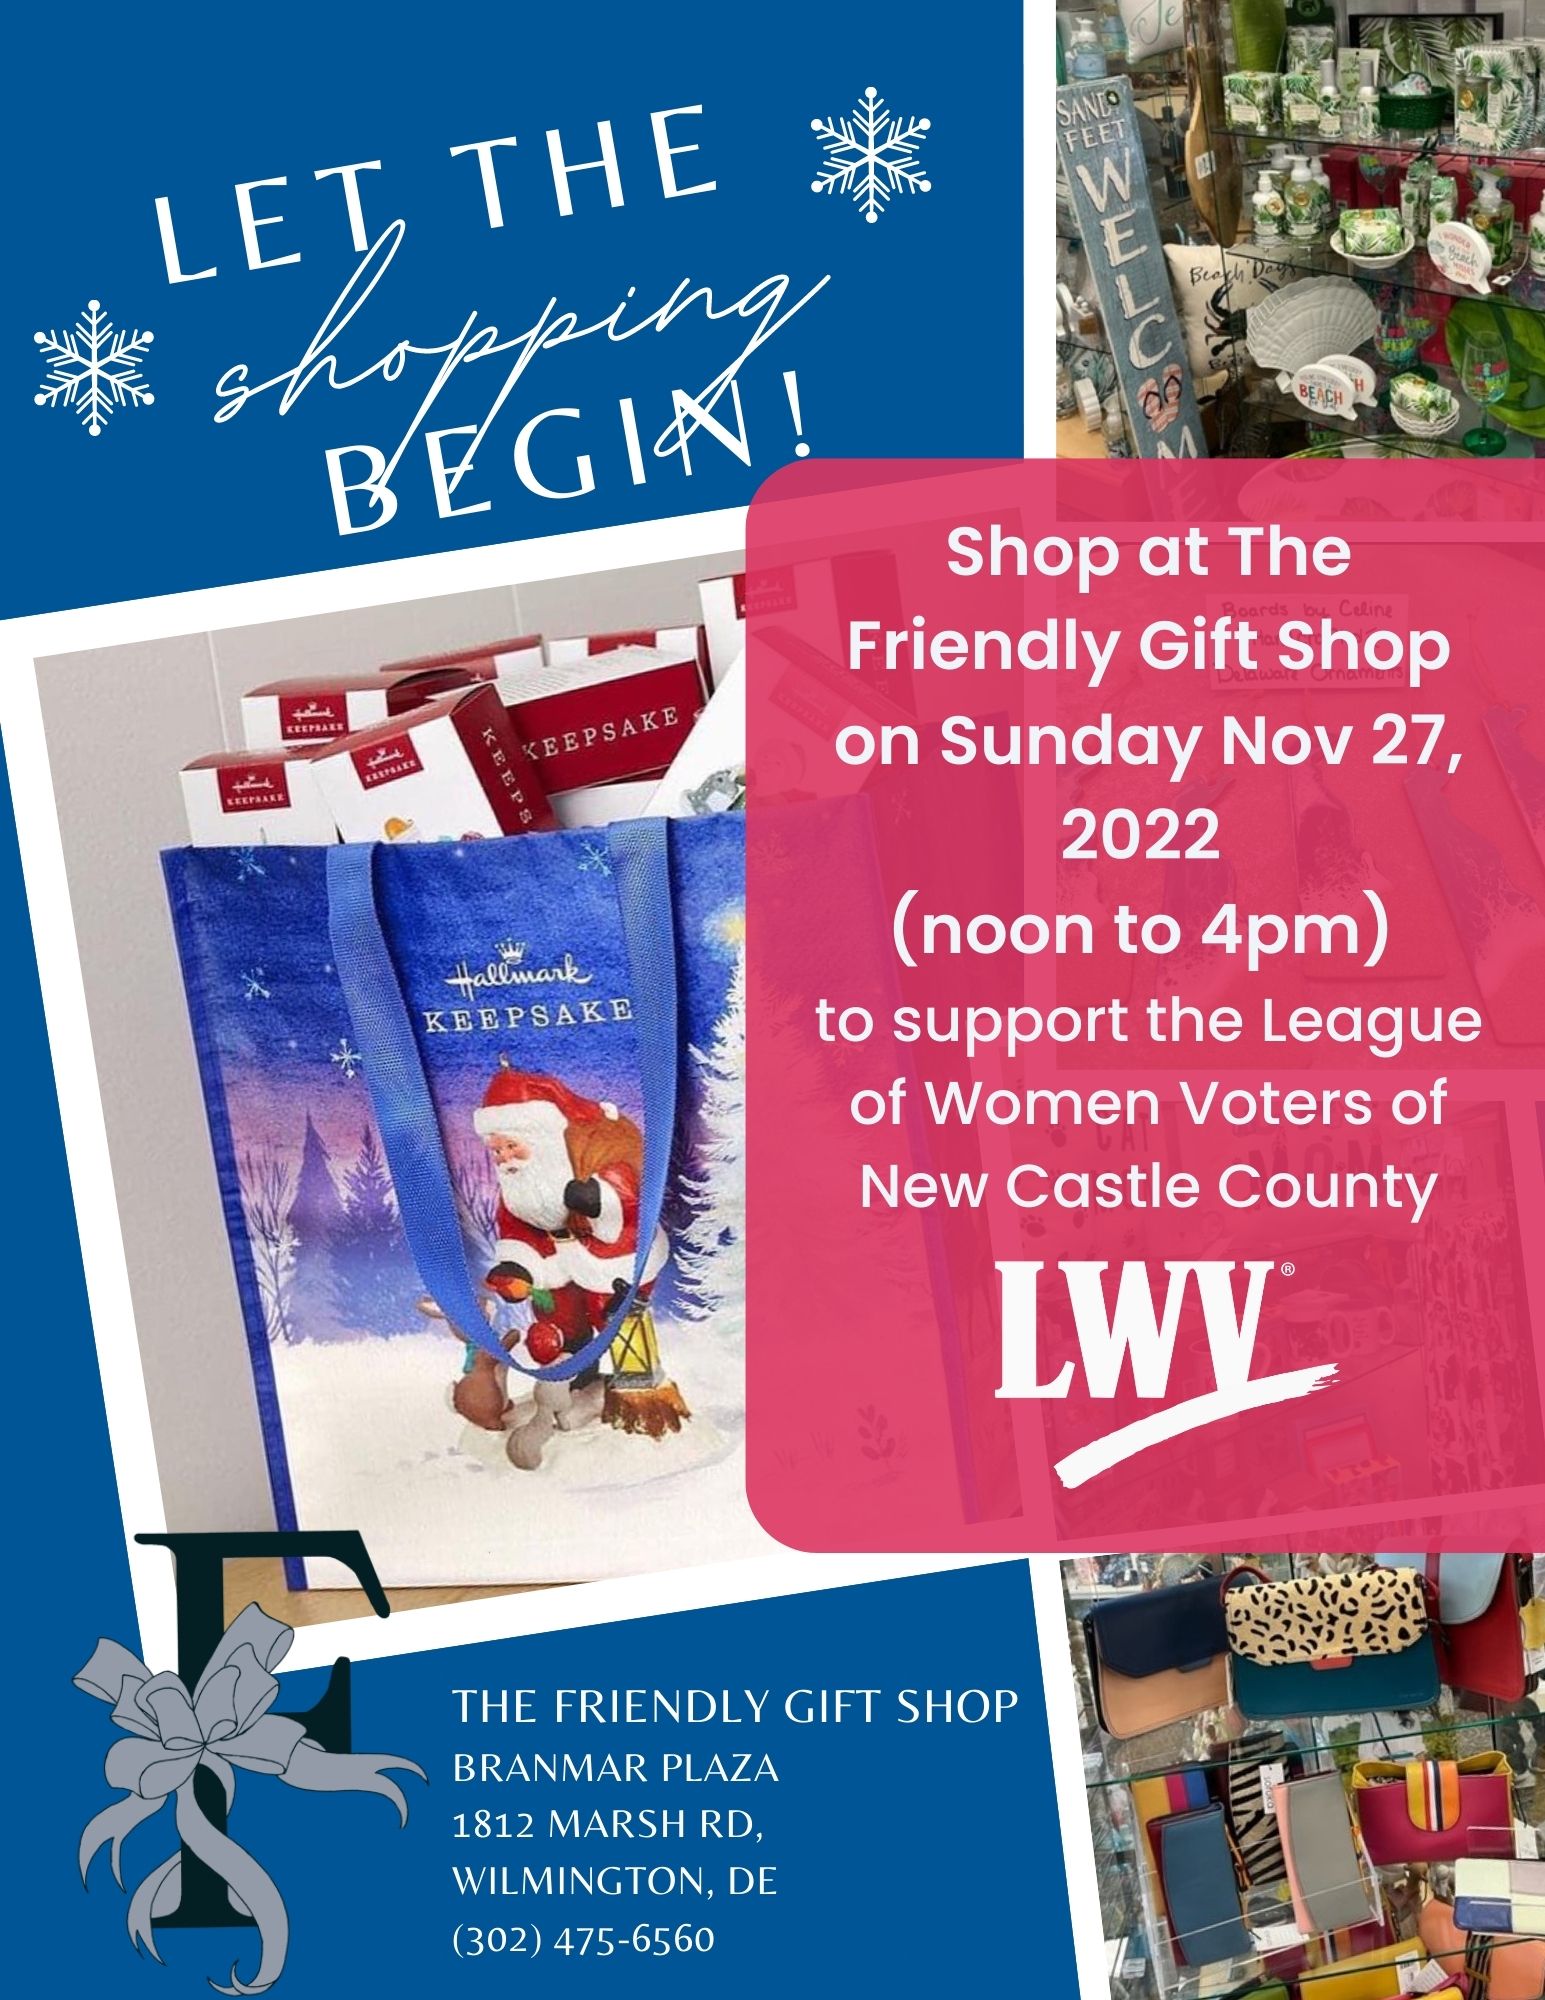 Shop at The Friendly Gift Shop on Sun Nov 27, 2022 (noon to 4pm) to Support the League of Women Voters of New Castle County